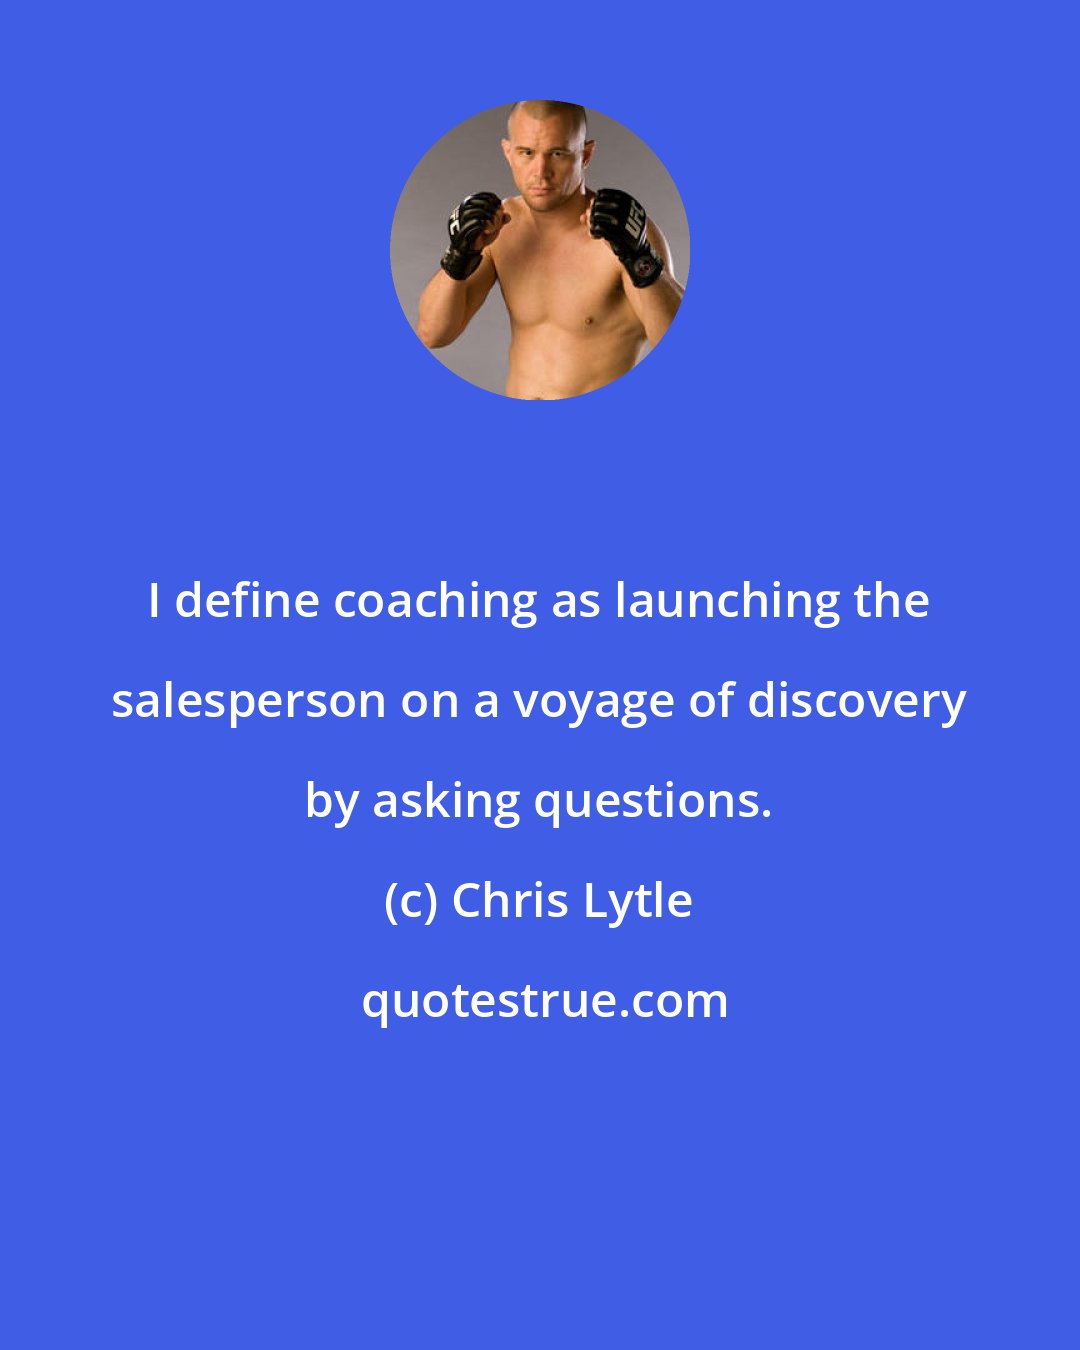 Chris Lytle: I define coaching as launching the salesperson on a voyage of discovery by asking questions.